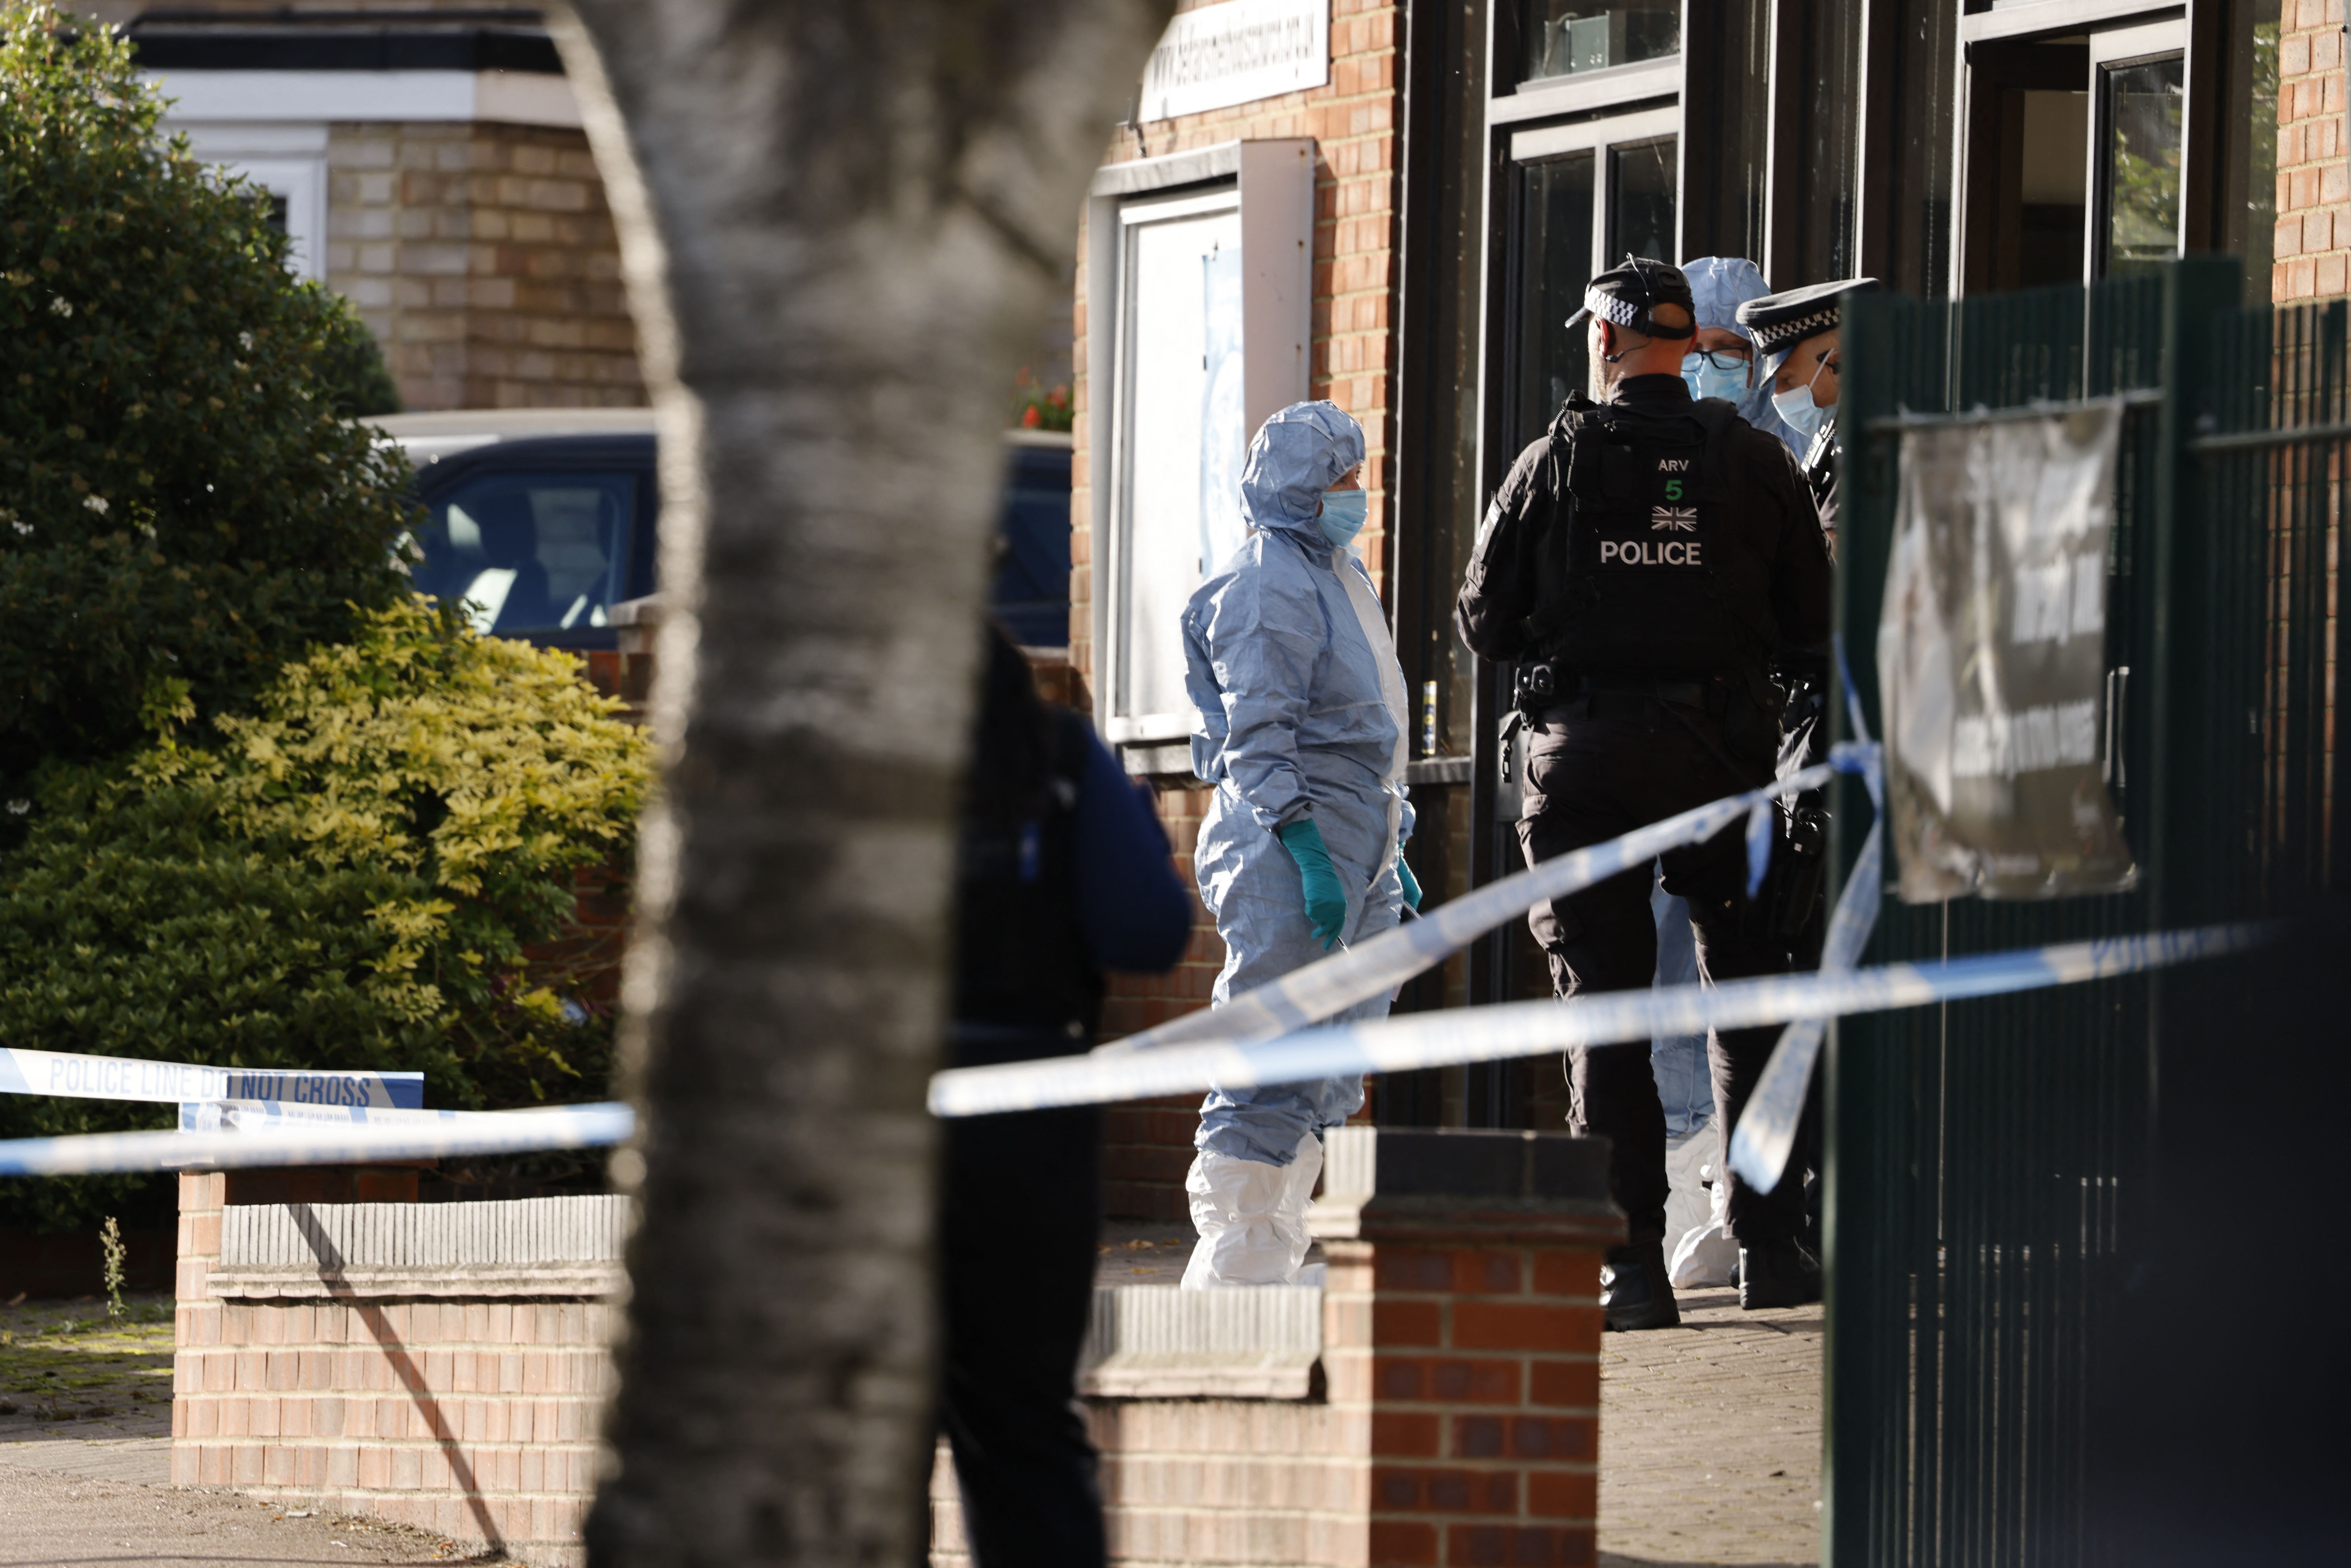 Police forensics officers work at the scene of a stabbing at Belfairs Methodist Church in Leigh-on-Sea, England, on October 15.